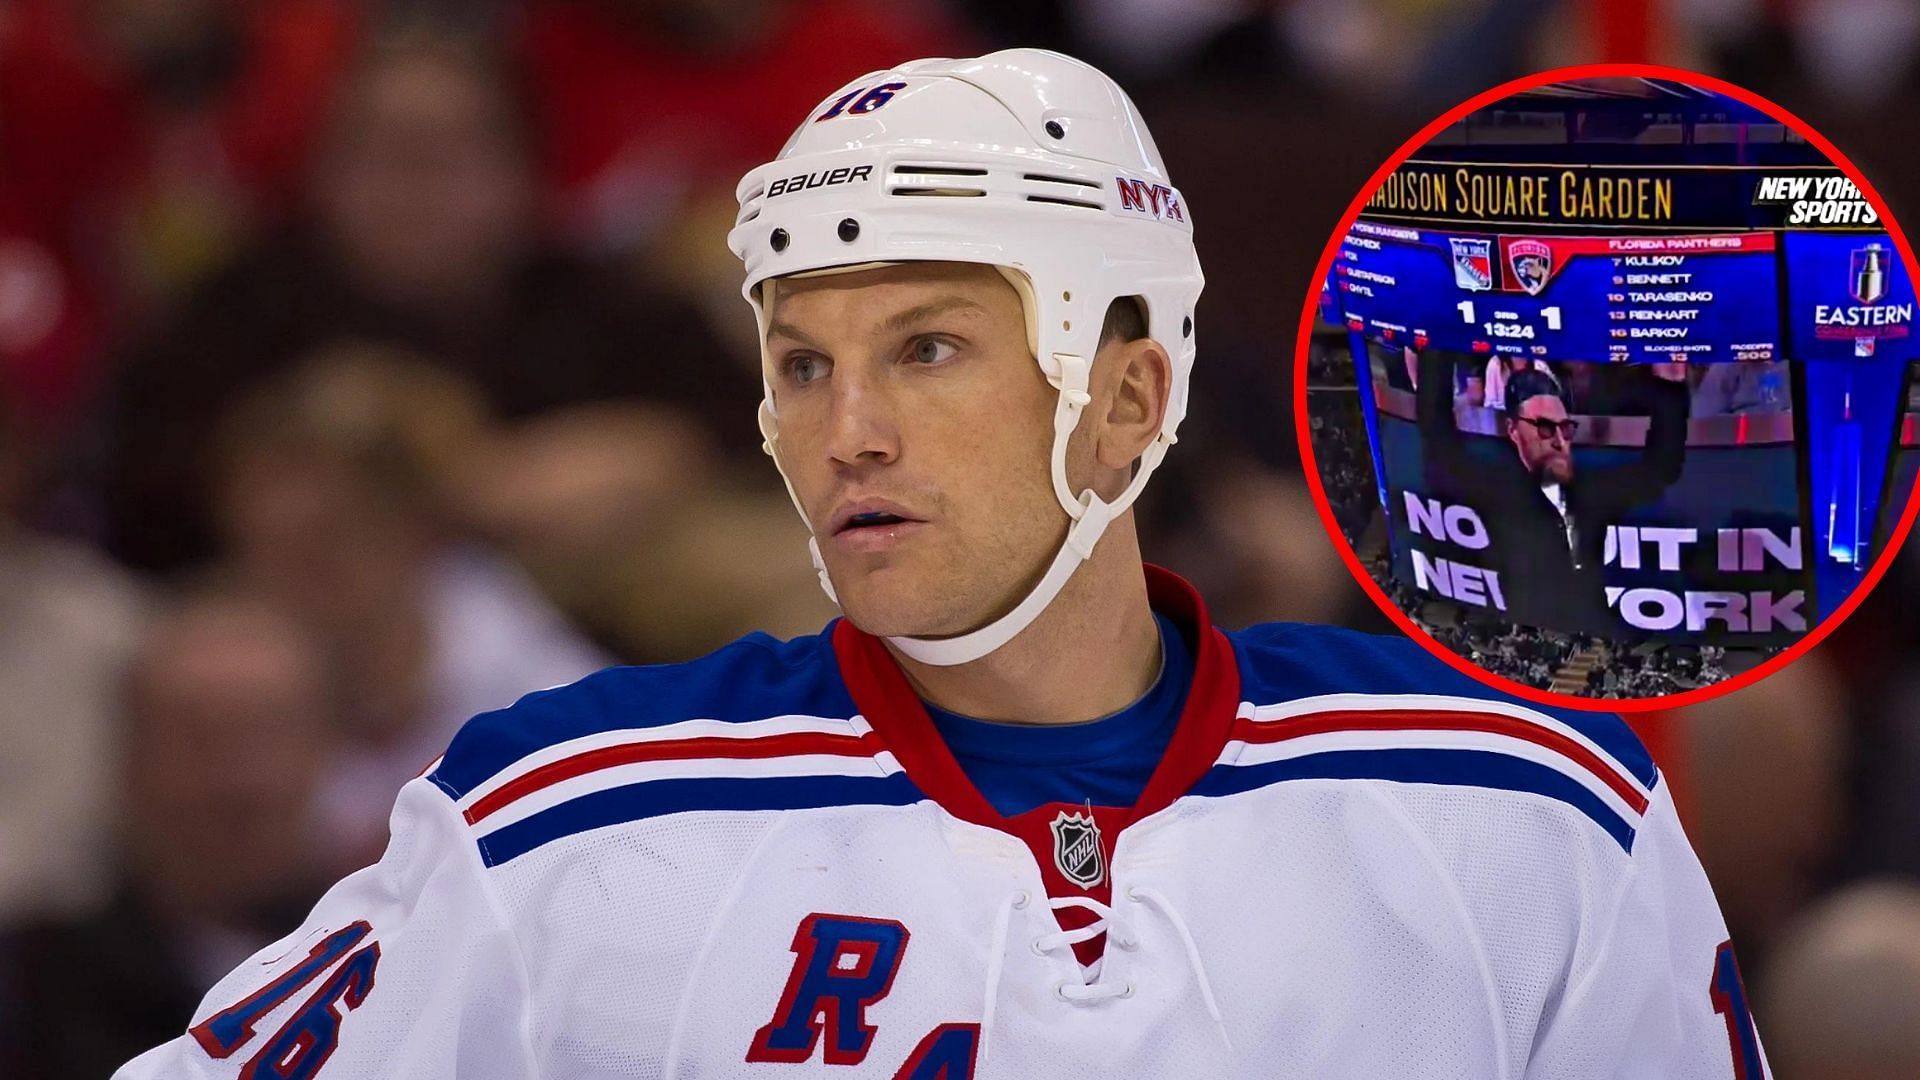 Sean Avery fires up MSG crowd at Rangers Game 2